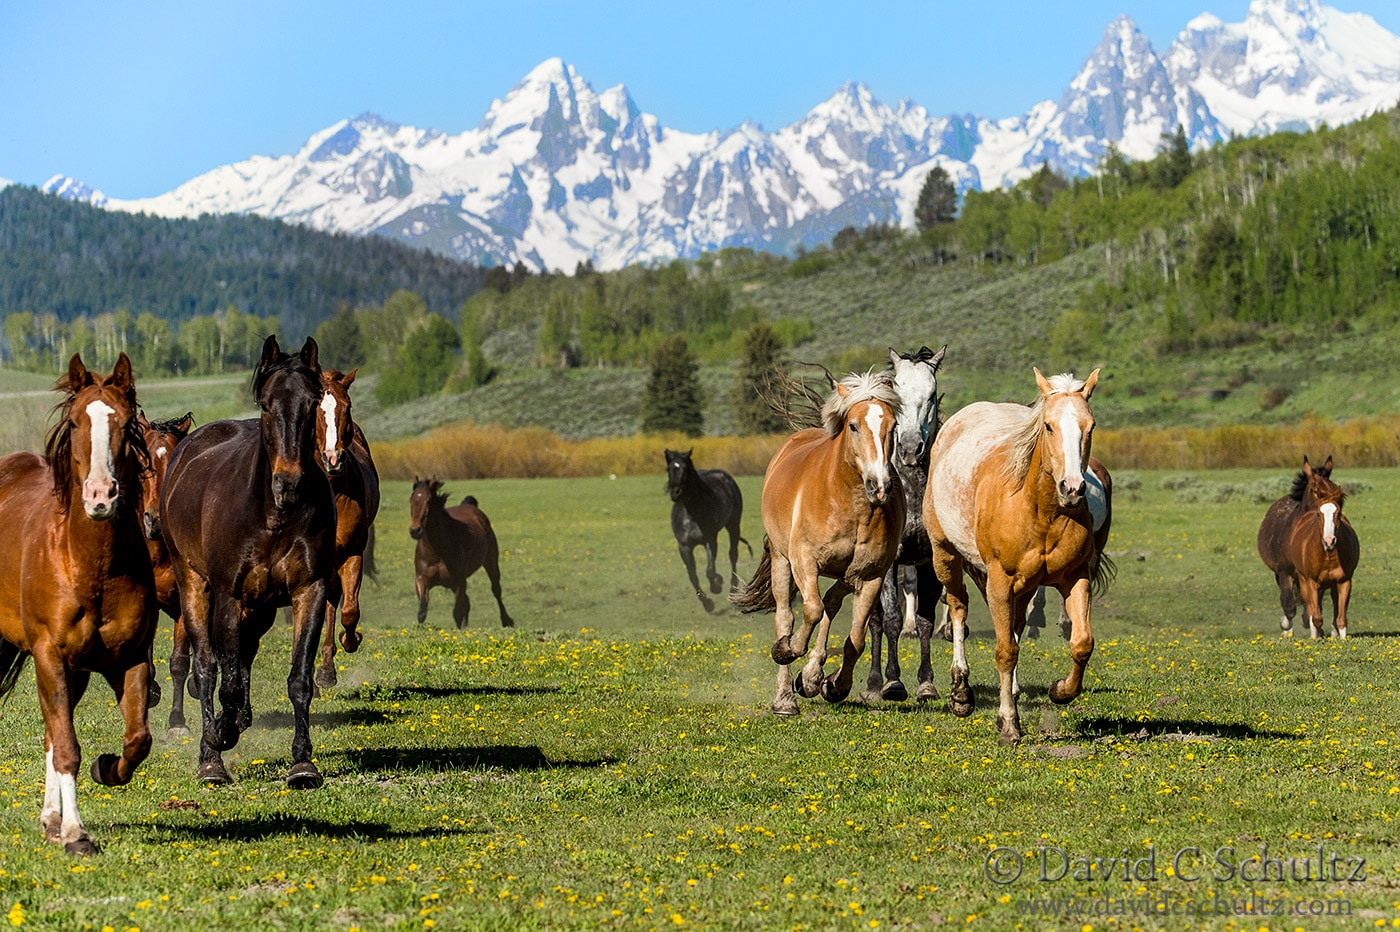 Horses and the Grand Tetons - Image #47-1282